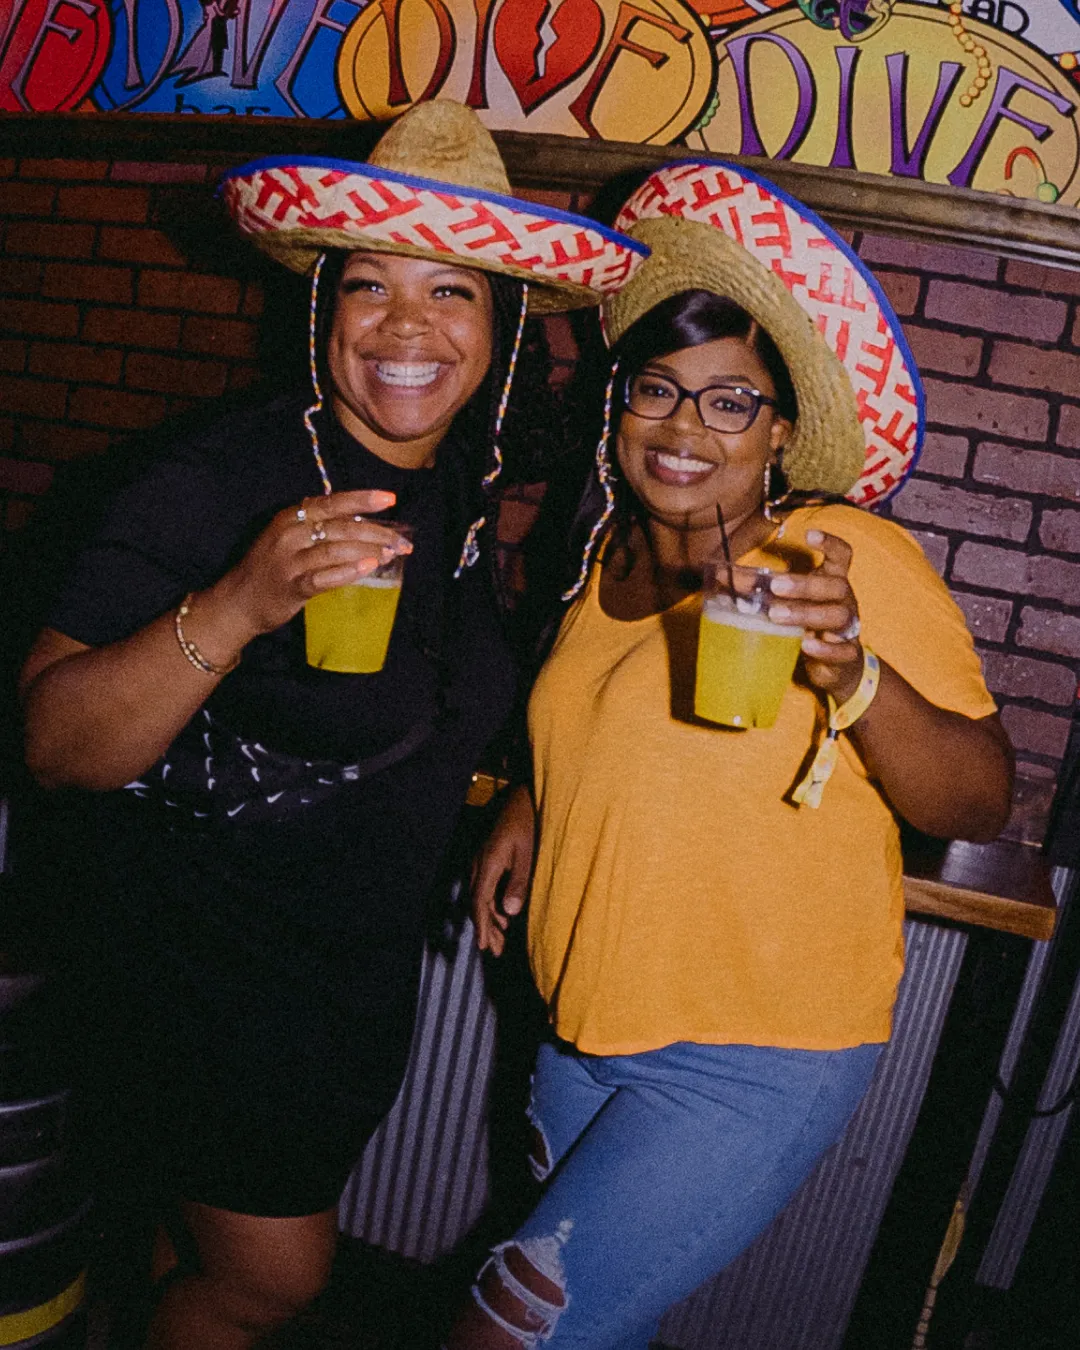 Gleeful girls in striking sombreros, creating a whirl of colors and laughter amidst the Tacos and Tequila bar crawl scene 
